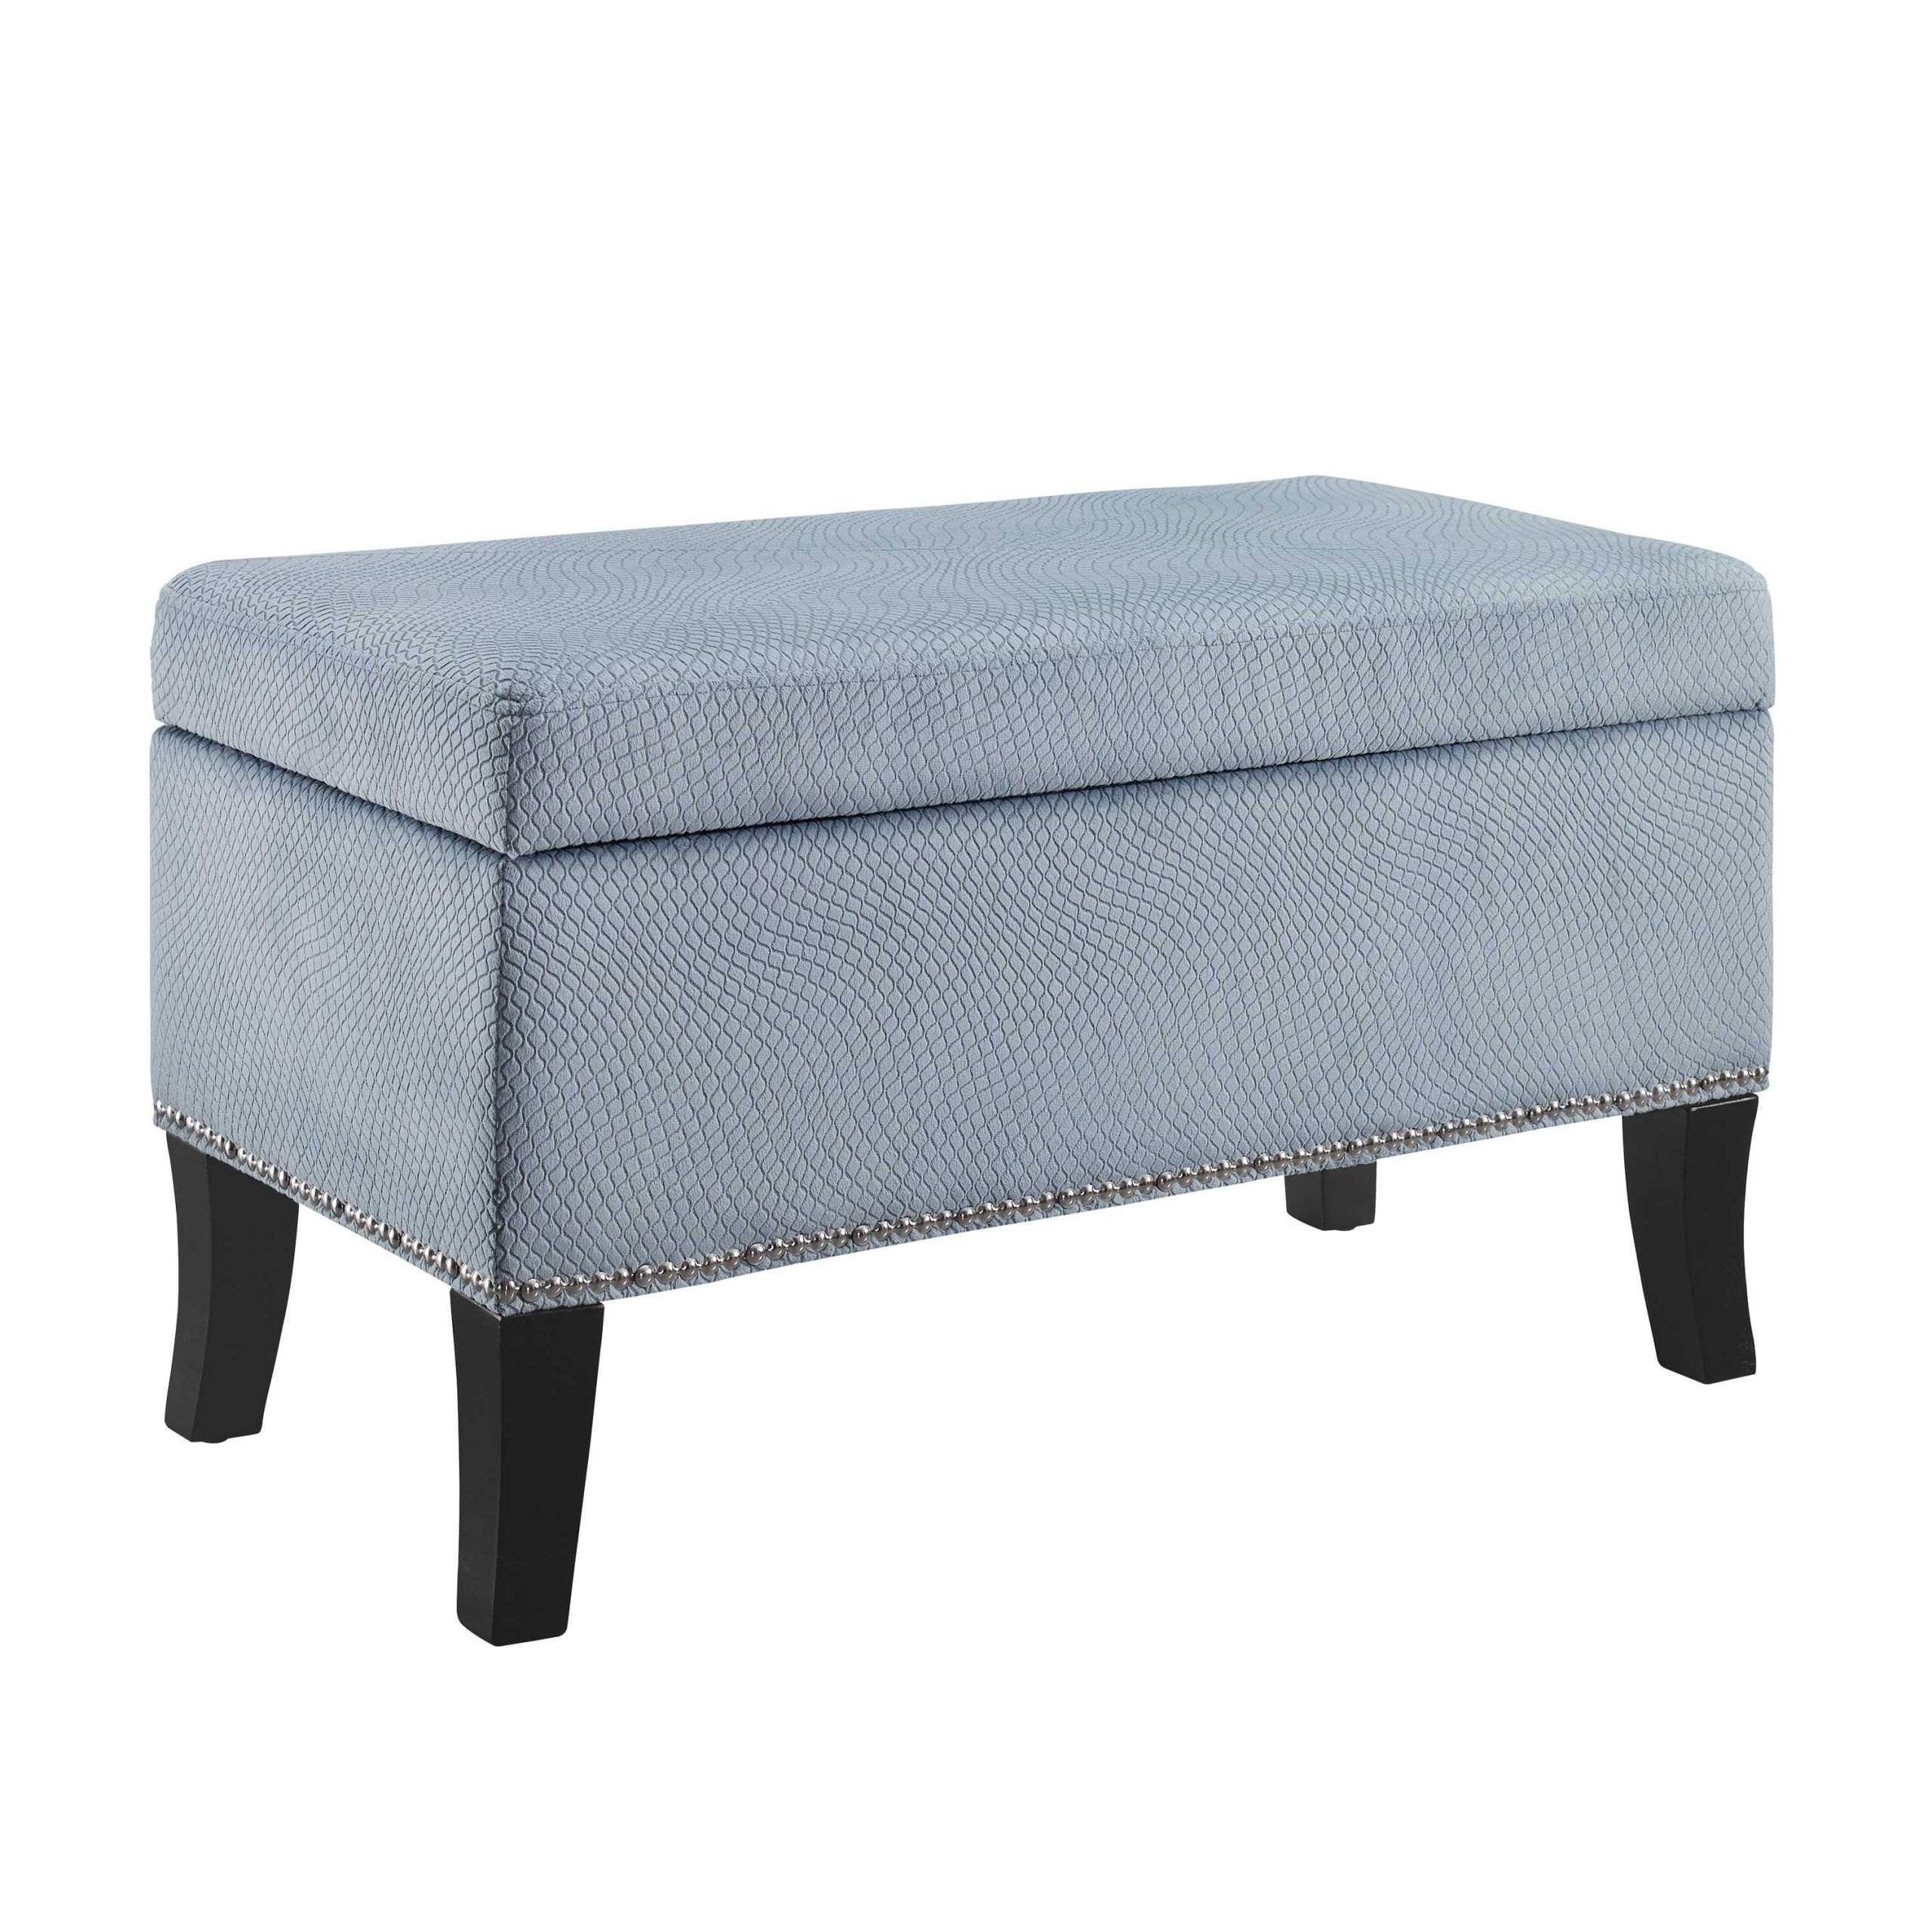 Fabric Upholstered Wooden Ottoman With Nailhead Trim, Blue And Black In Gray Fabric Round Modern Ottomans With Rope Trim (View 9 of 20)